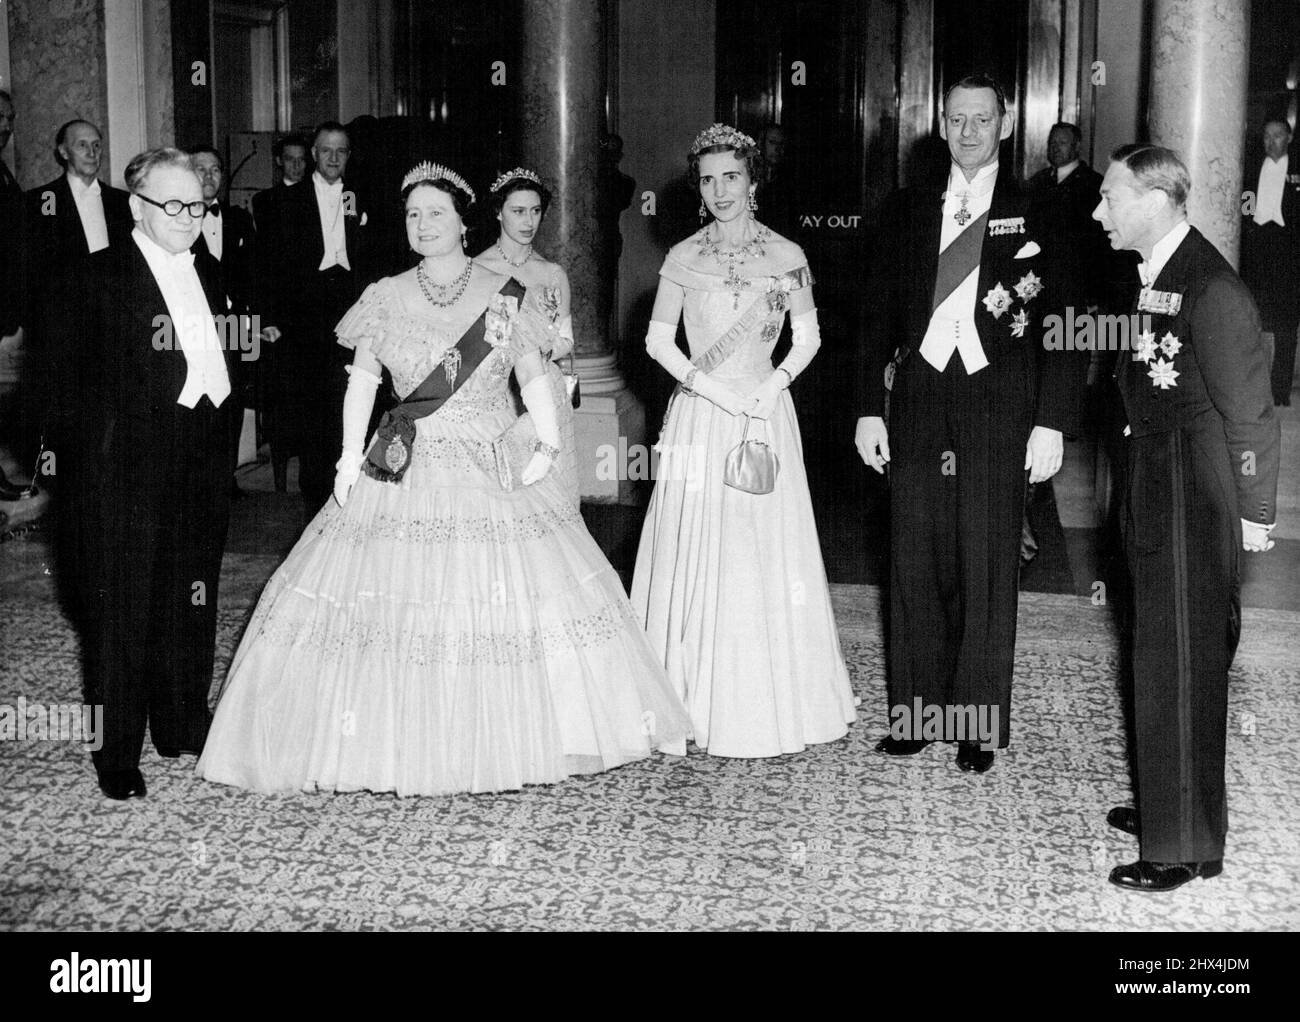 Photo Shows:- MR. Herbert (Lord Festival) Morrison (Britain's Foreign Minister), Britain's Queen Elizabeth, Queen Ingrid of Denmark, King Frederick of Denmark, Britain's King George VI.Princess Margaret is Standing Behind the Queen . Danish And British Royalty at Government Reception:- Grand final to the visit of the Danish King and Queen was a Government Reception Held at Lancaster house, London Tonight. Members of the British Royal Family and the Government were Present. May 10, 1951. (Photo by Paul Popper). Stock Photo